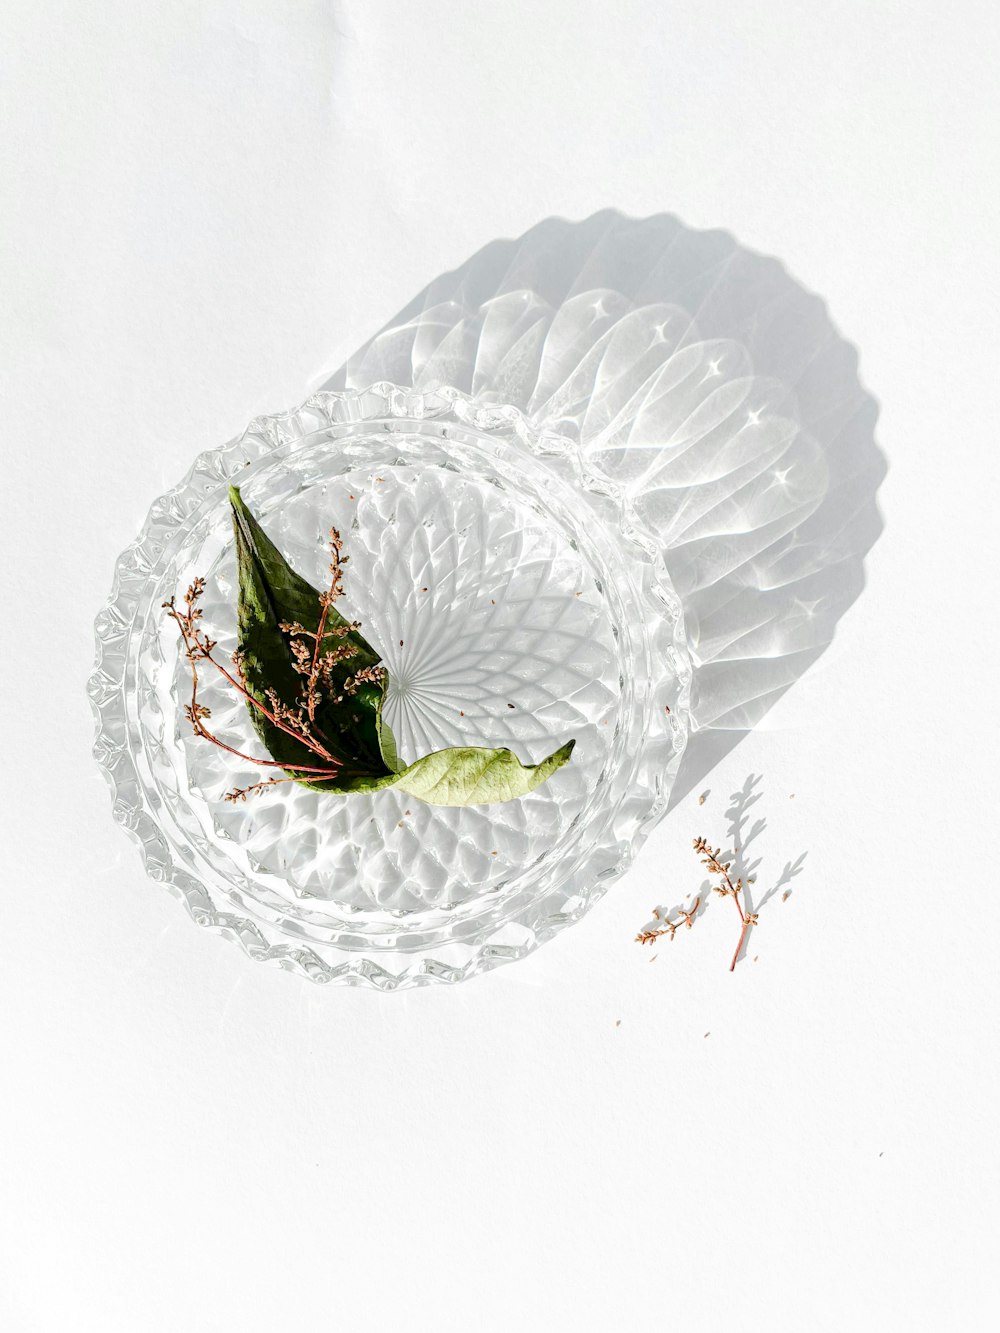 green leaf on white round plate